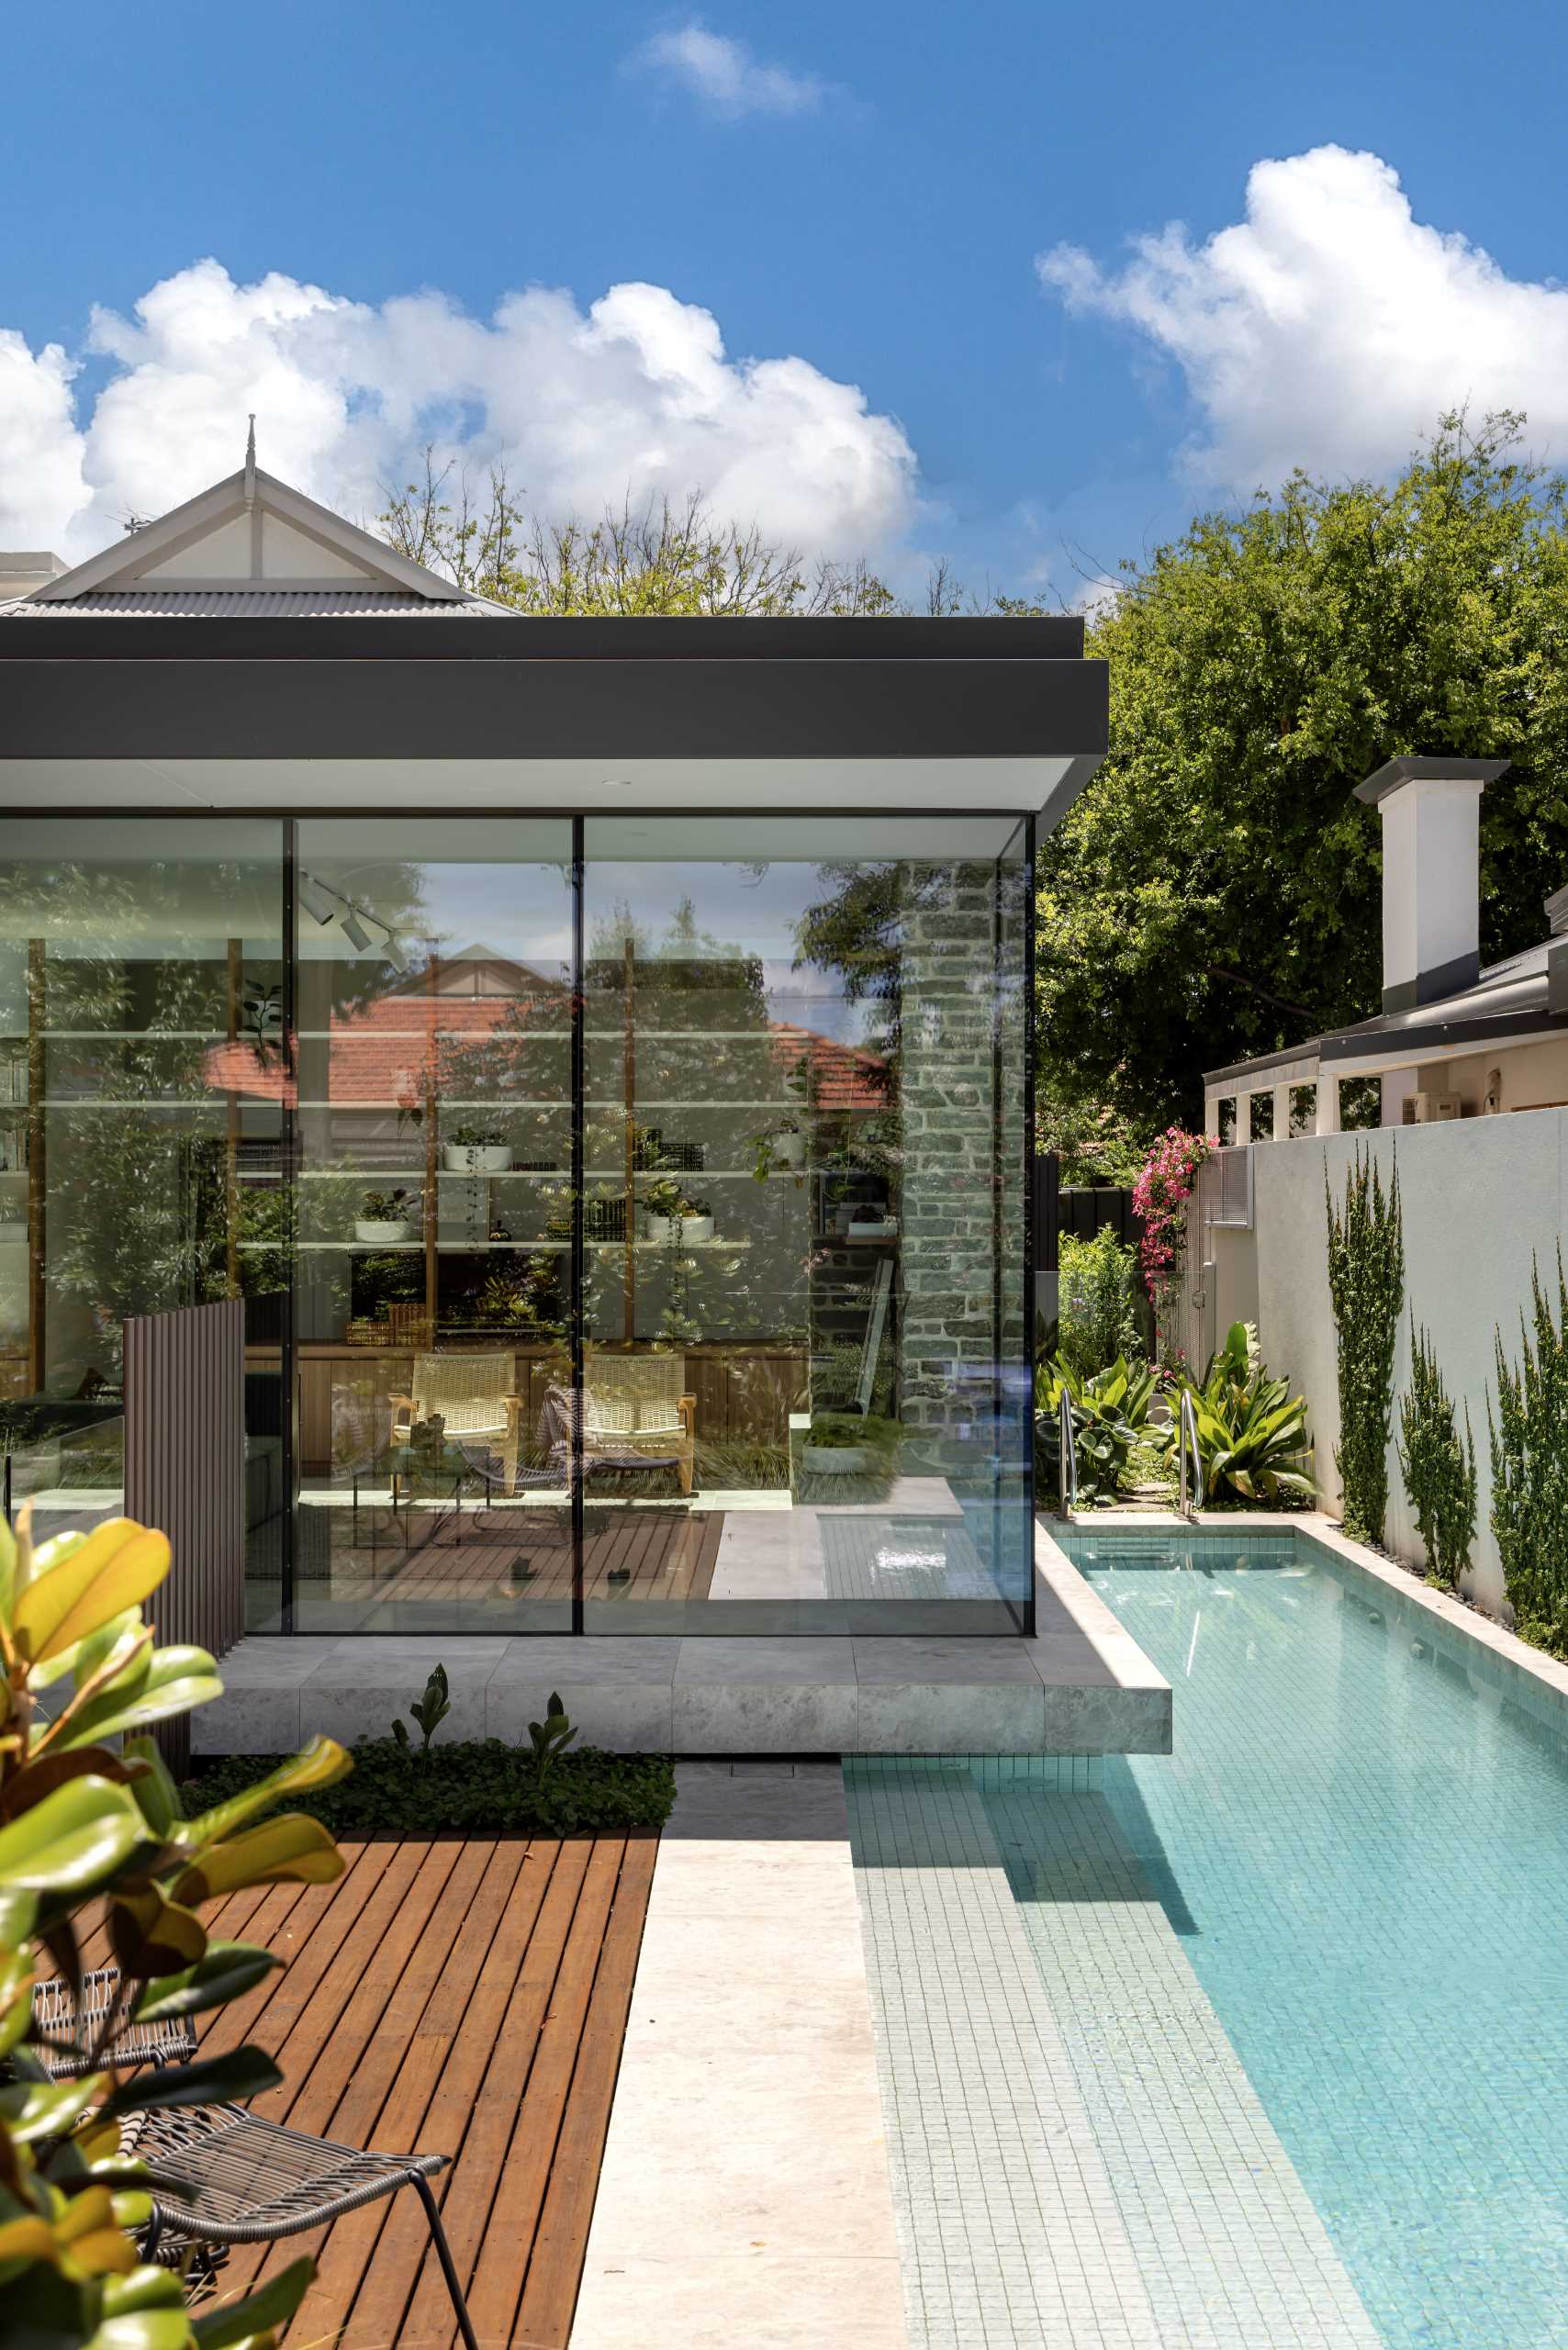 A structured floating box with glass walls has a nearby sunken garden, a patio, and a rectangular pool.